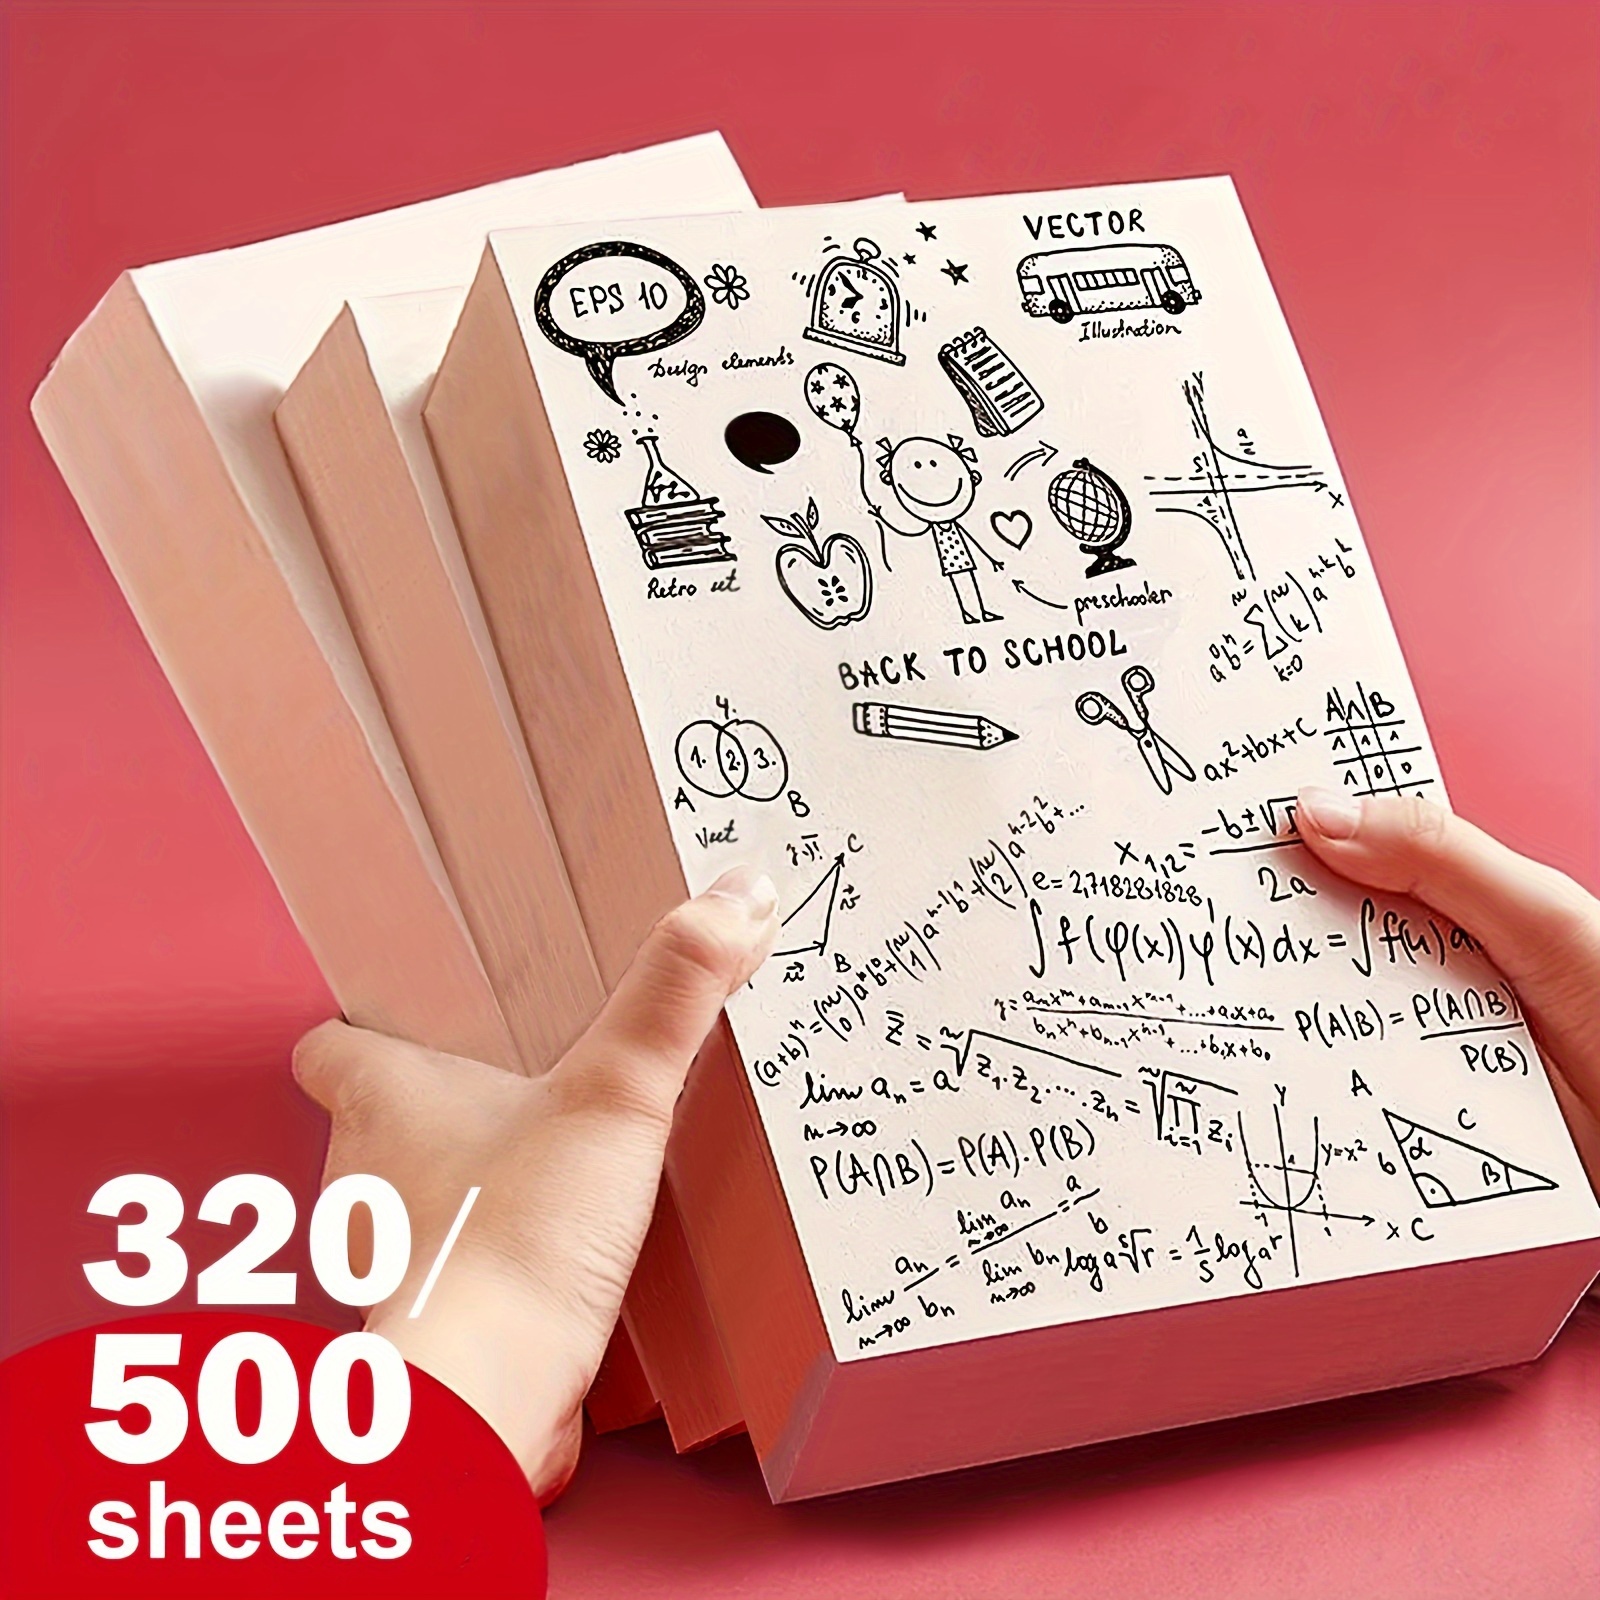 

320/500 Sheets, A5 Extra Thick Blank Scratch Pad, Memo Pad, Sketch Paper, Painting Book, Sketchbook, Suitable For Office School Home